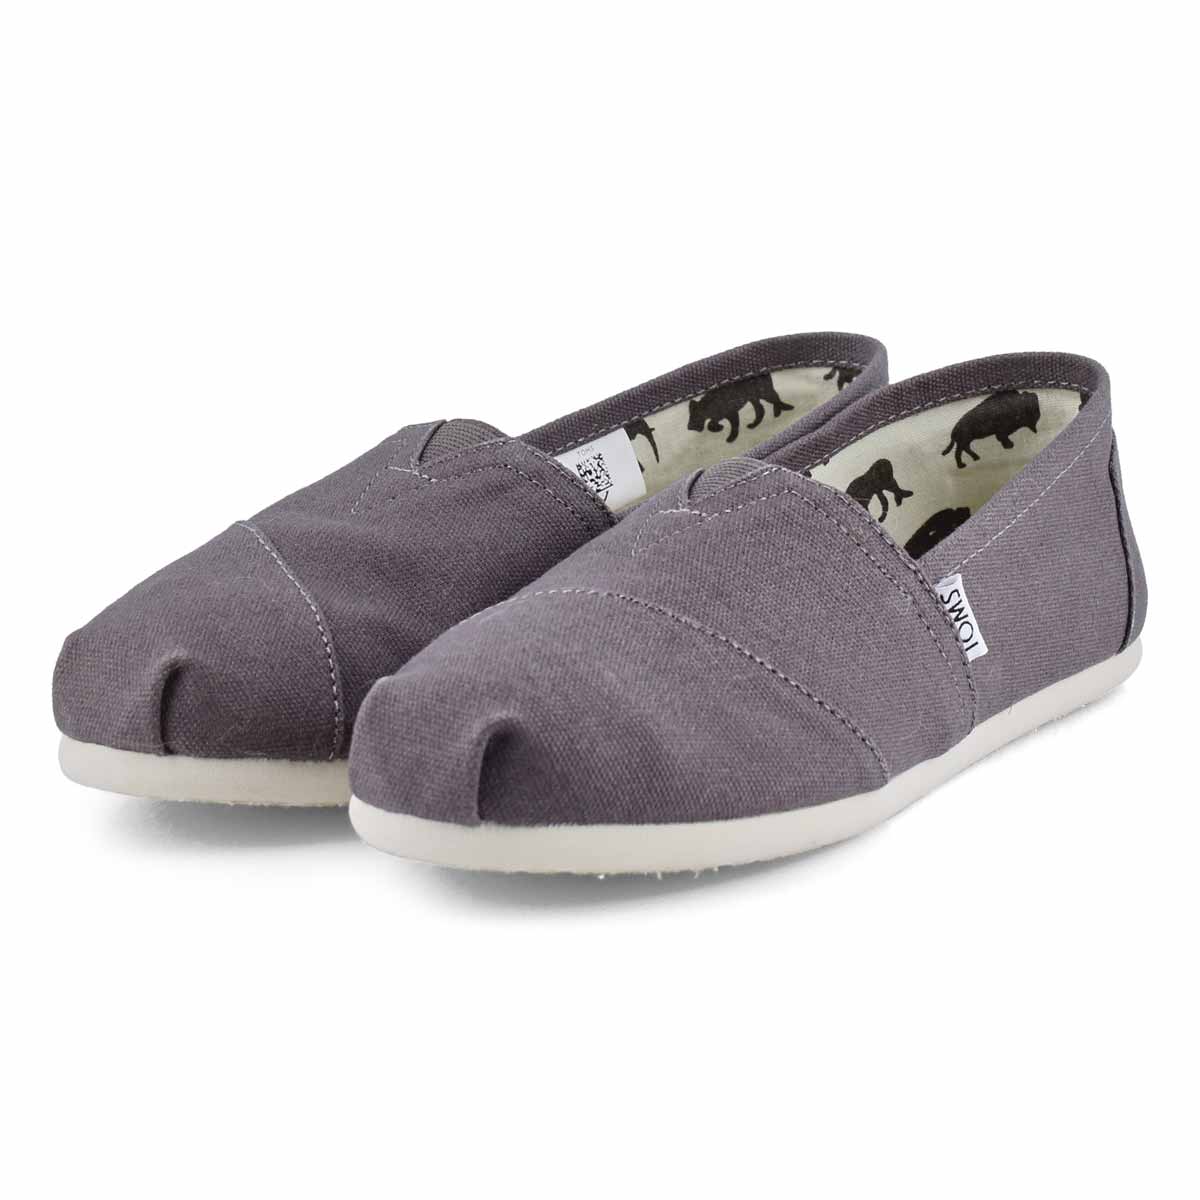 TOMS Women's Classic Canvas Loafer - Ash Grey | SoftMoc.com